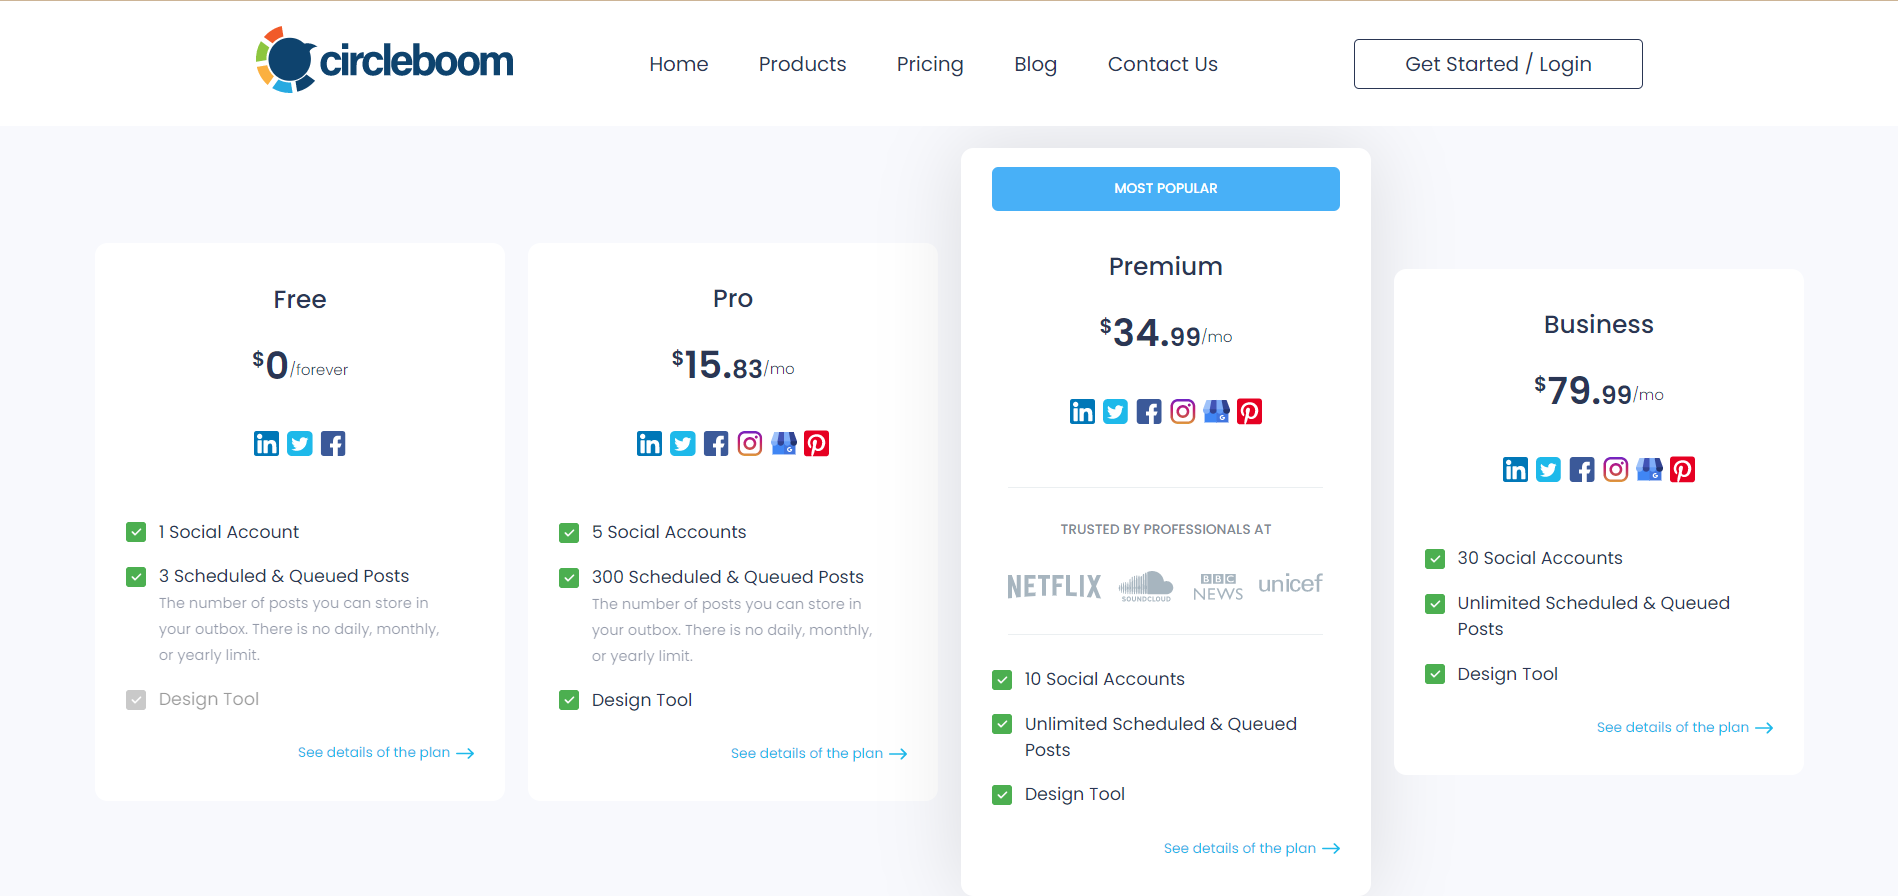 There are four subscription options on Circleboom Publish